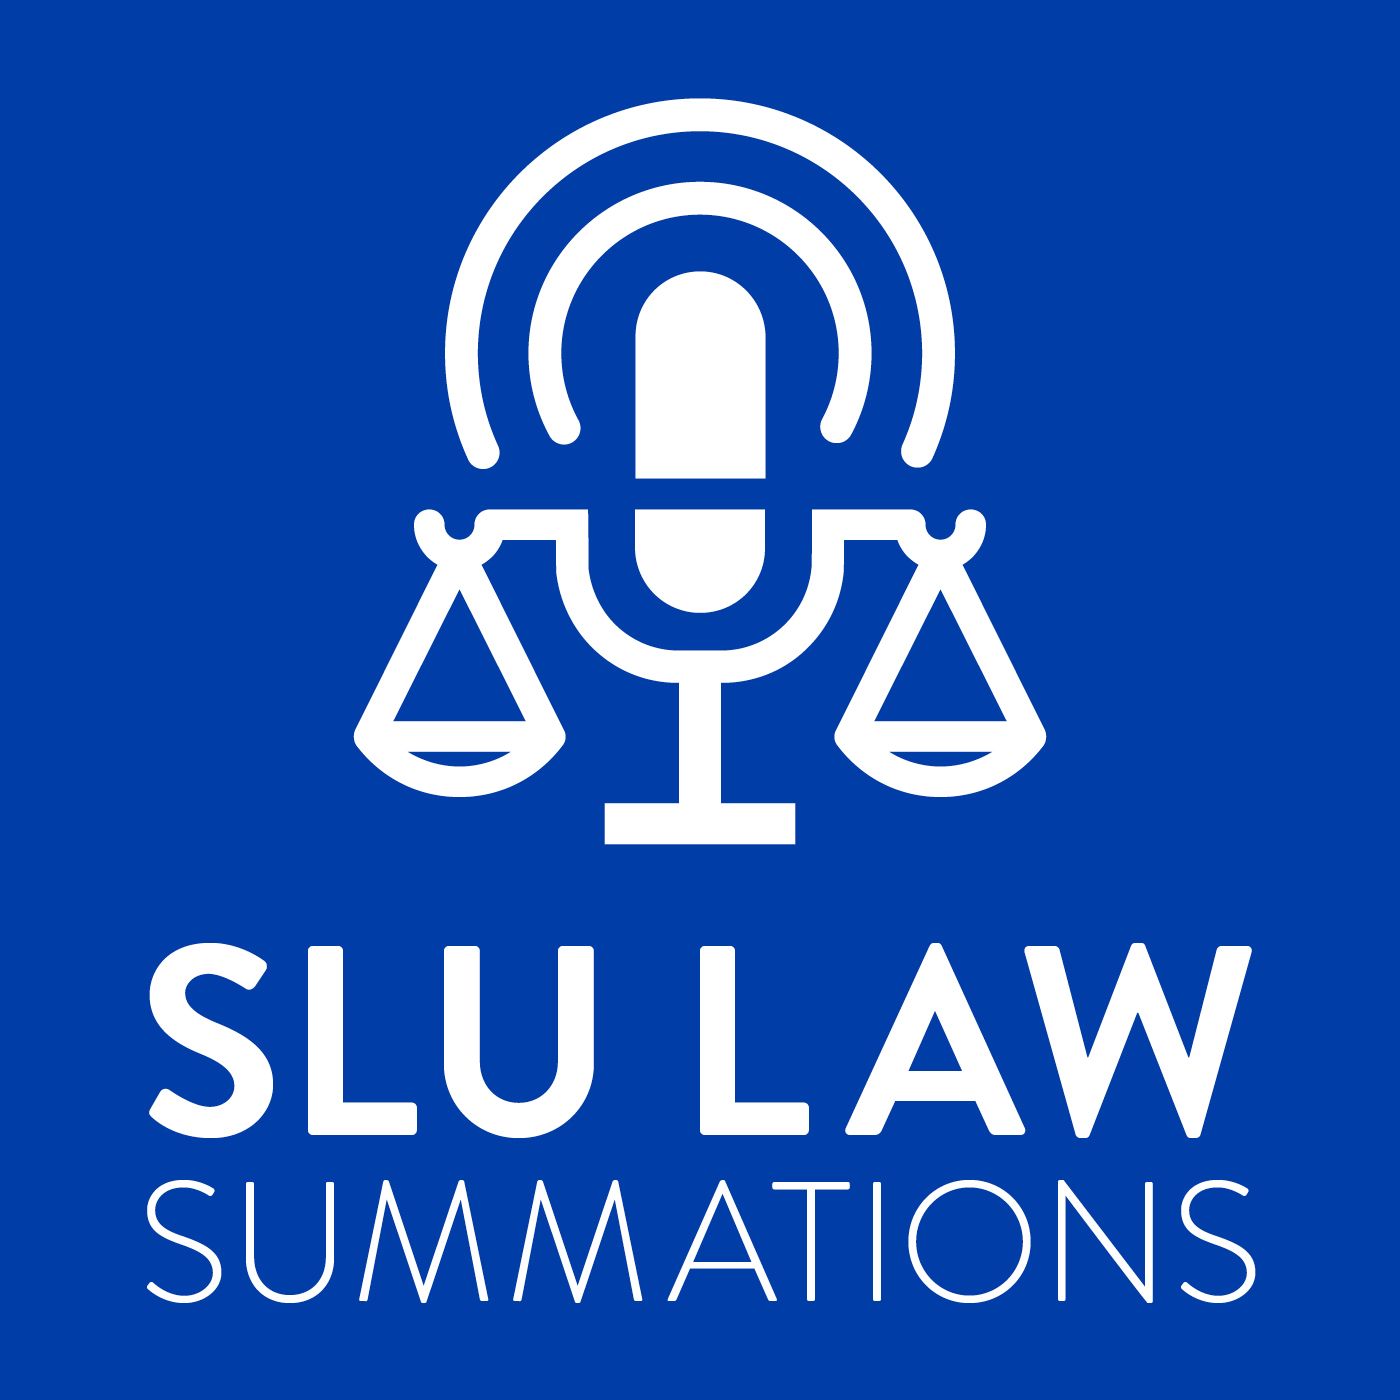 Muck Rack SLU LAW Summations: Contact Information Journalists and